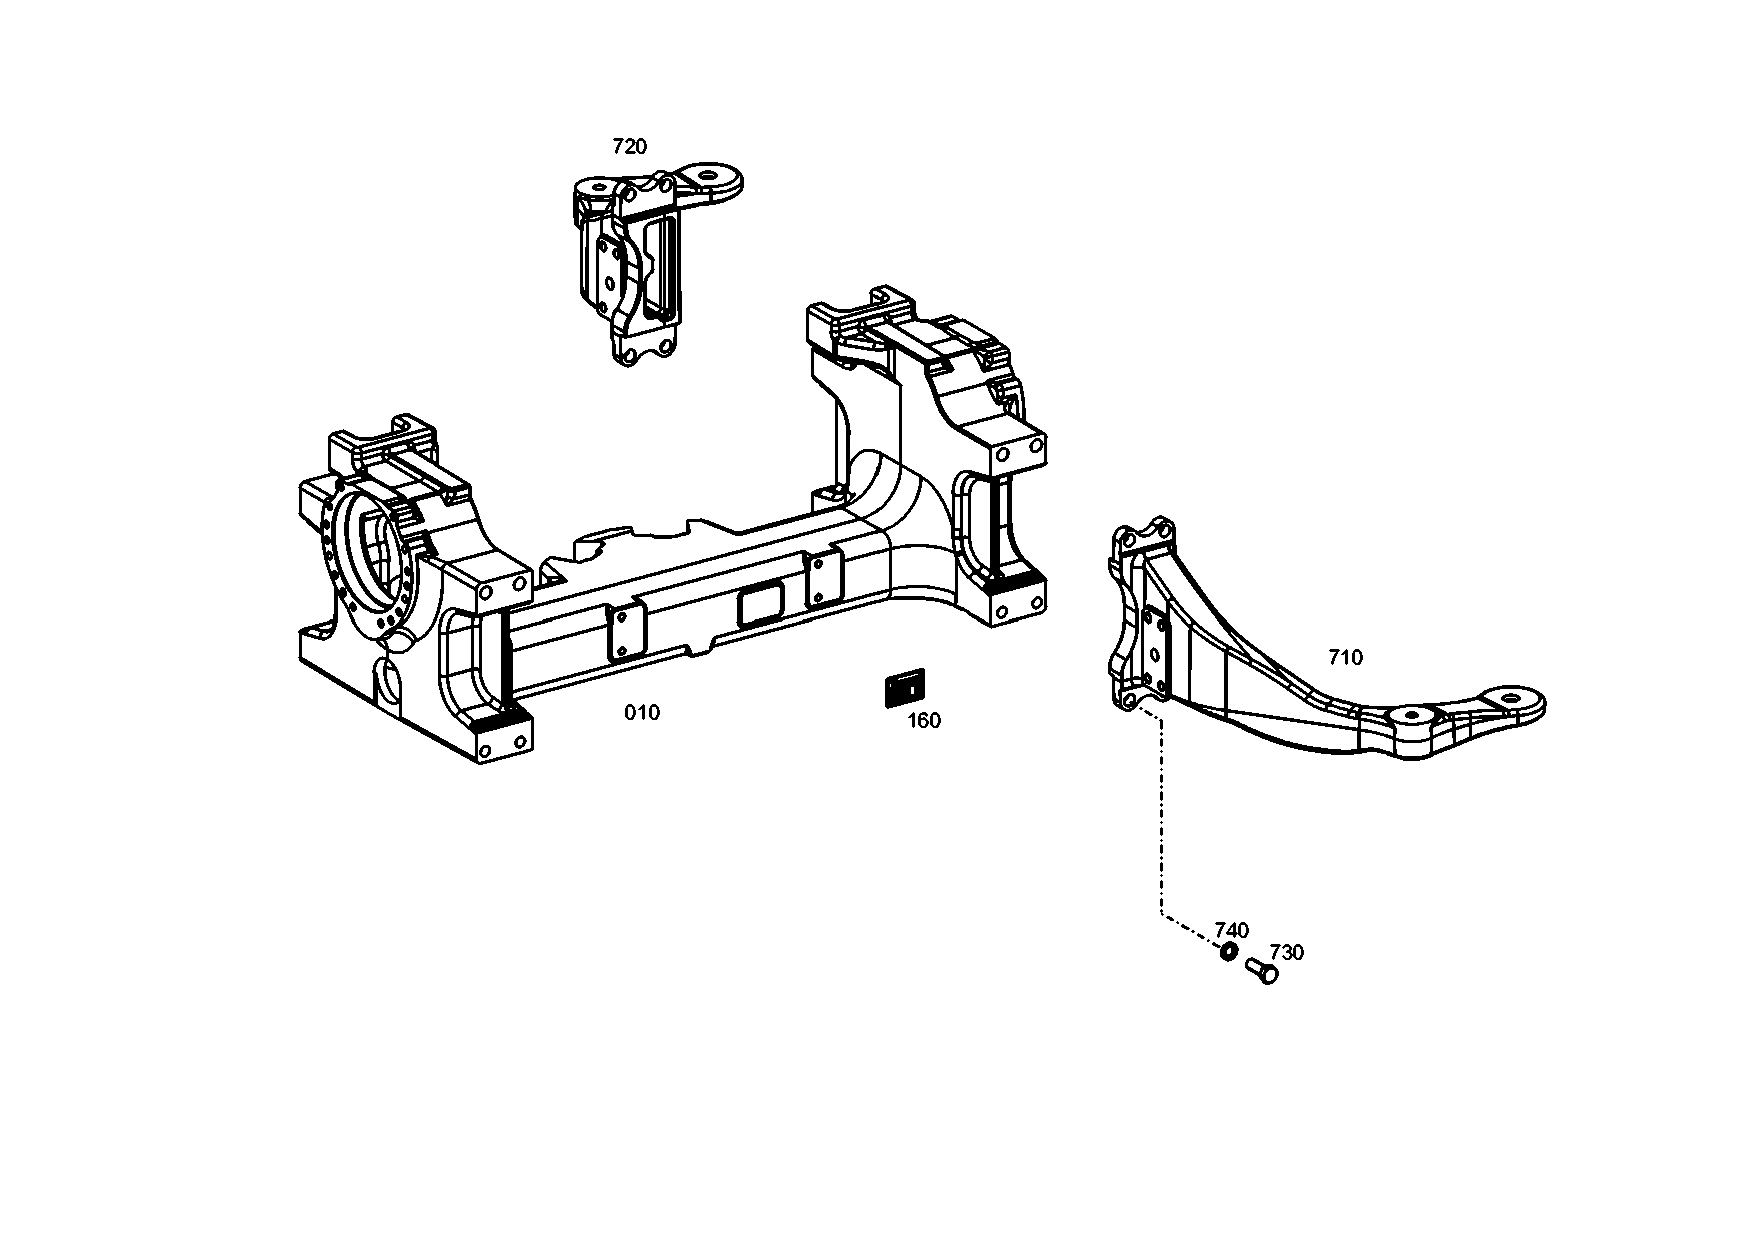 drawing for BUCHER FRANZ GMBH A0003200870 - SPRING CARRIER (figure 3)